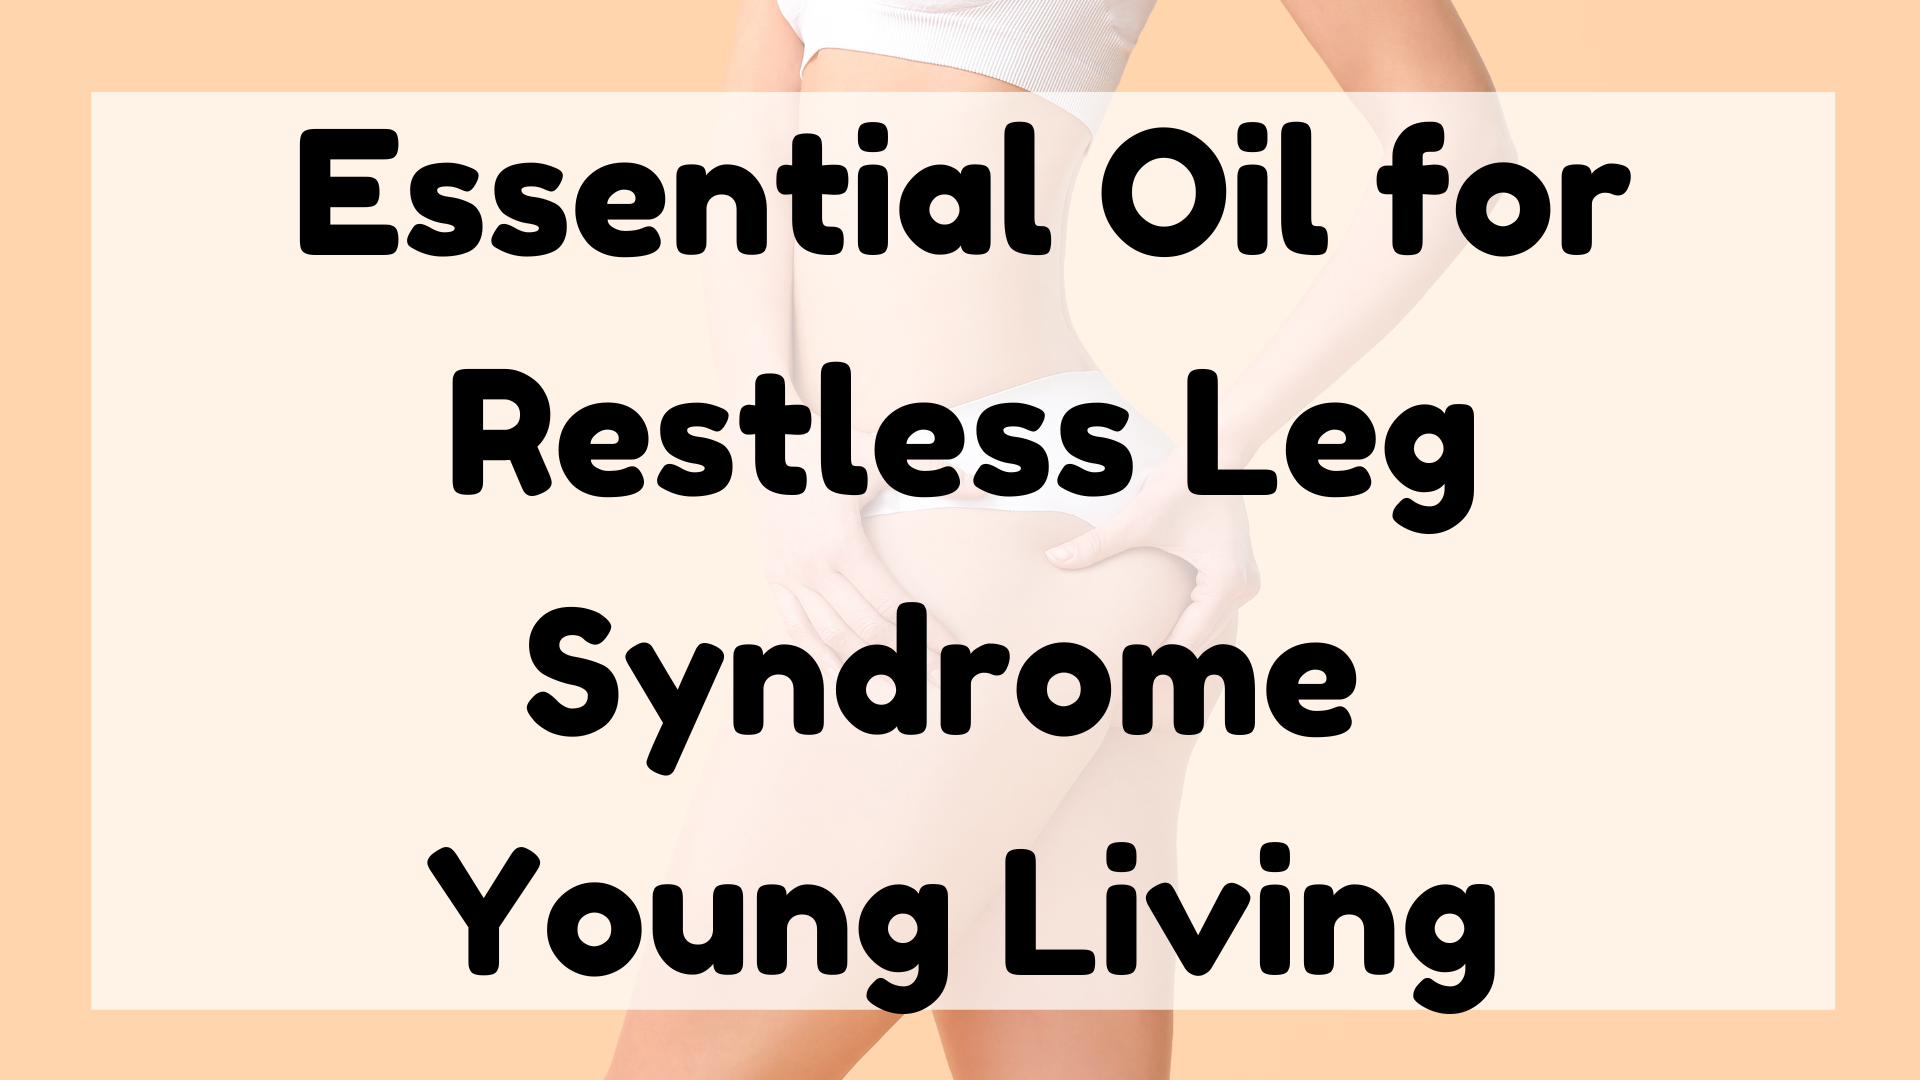 Essential Oil for Restless Leg Syndrome Young Living featured image